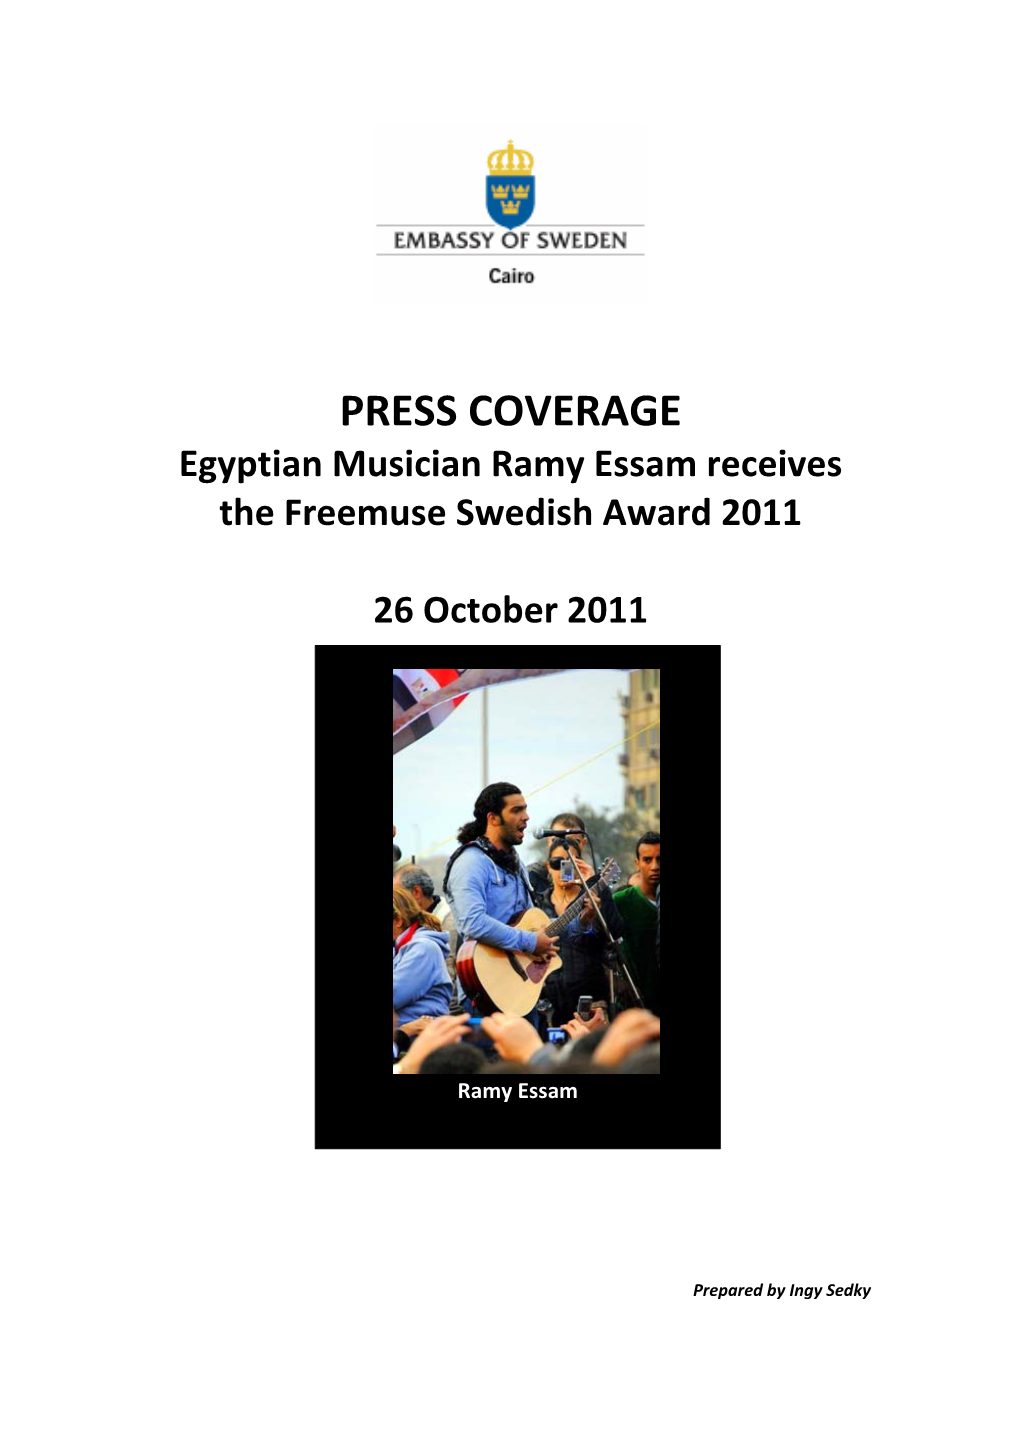 PRESS COVERAGE Egyptian Musician Ramy Essam Receives the Freemuse Swedish Award 2011